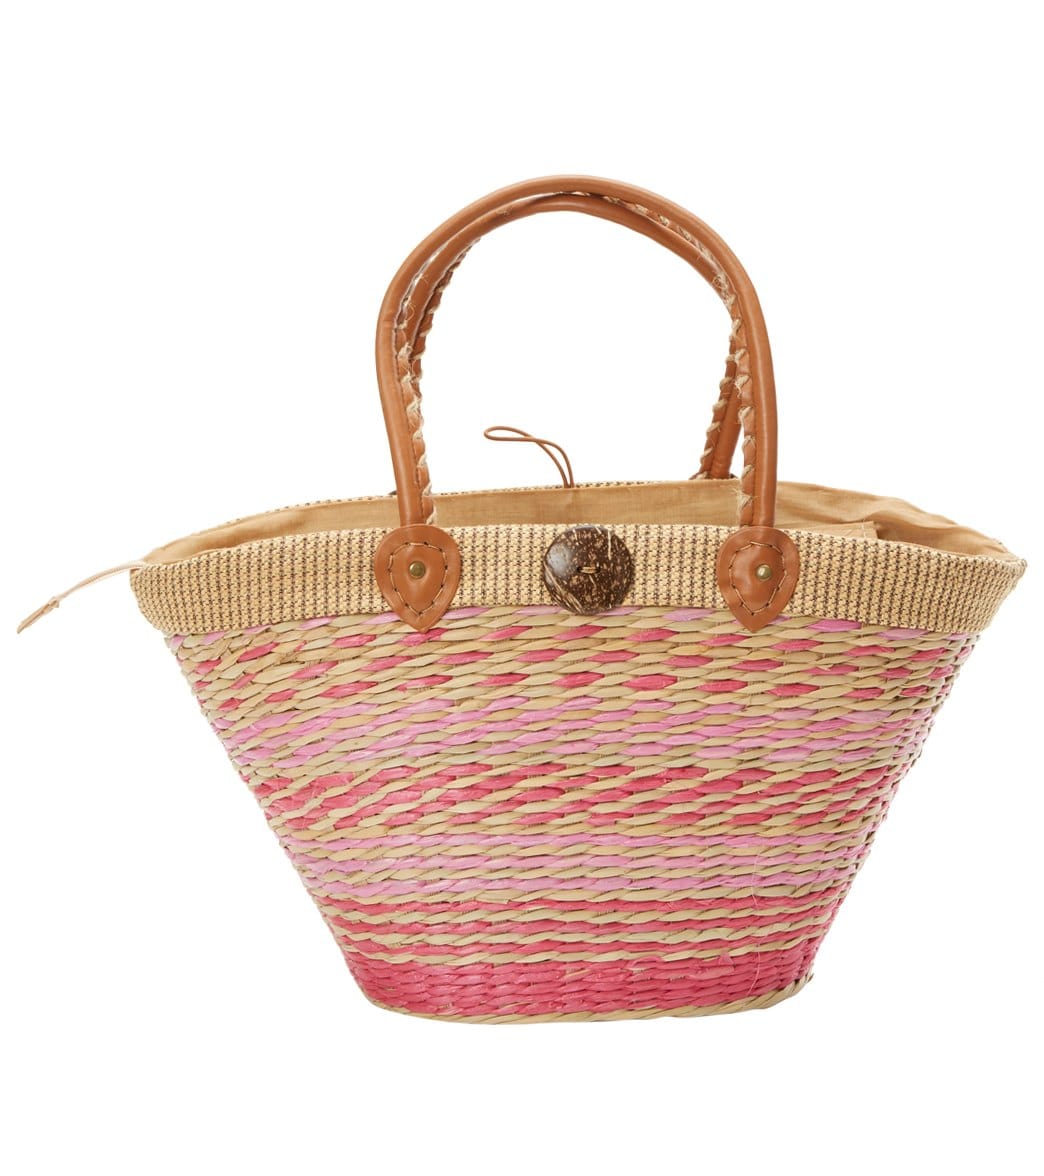 Pia Rossini Lima Basket Tote Bag at SwimOutlet.com - Free Shipping